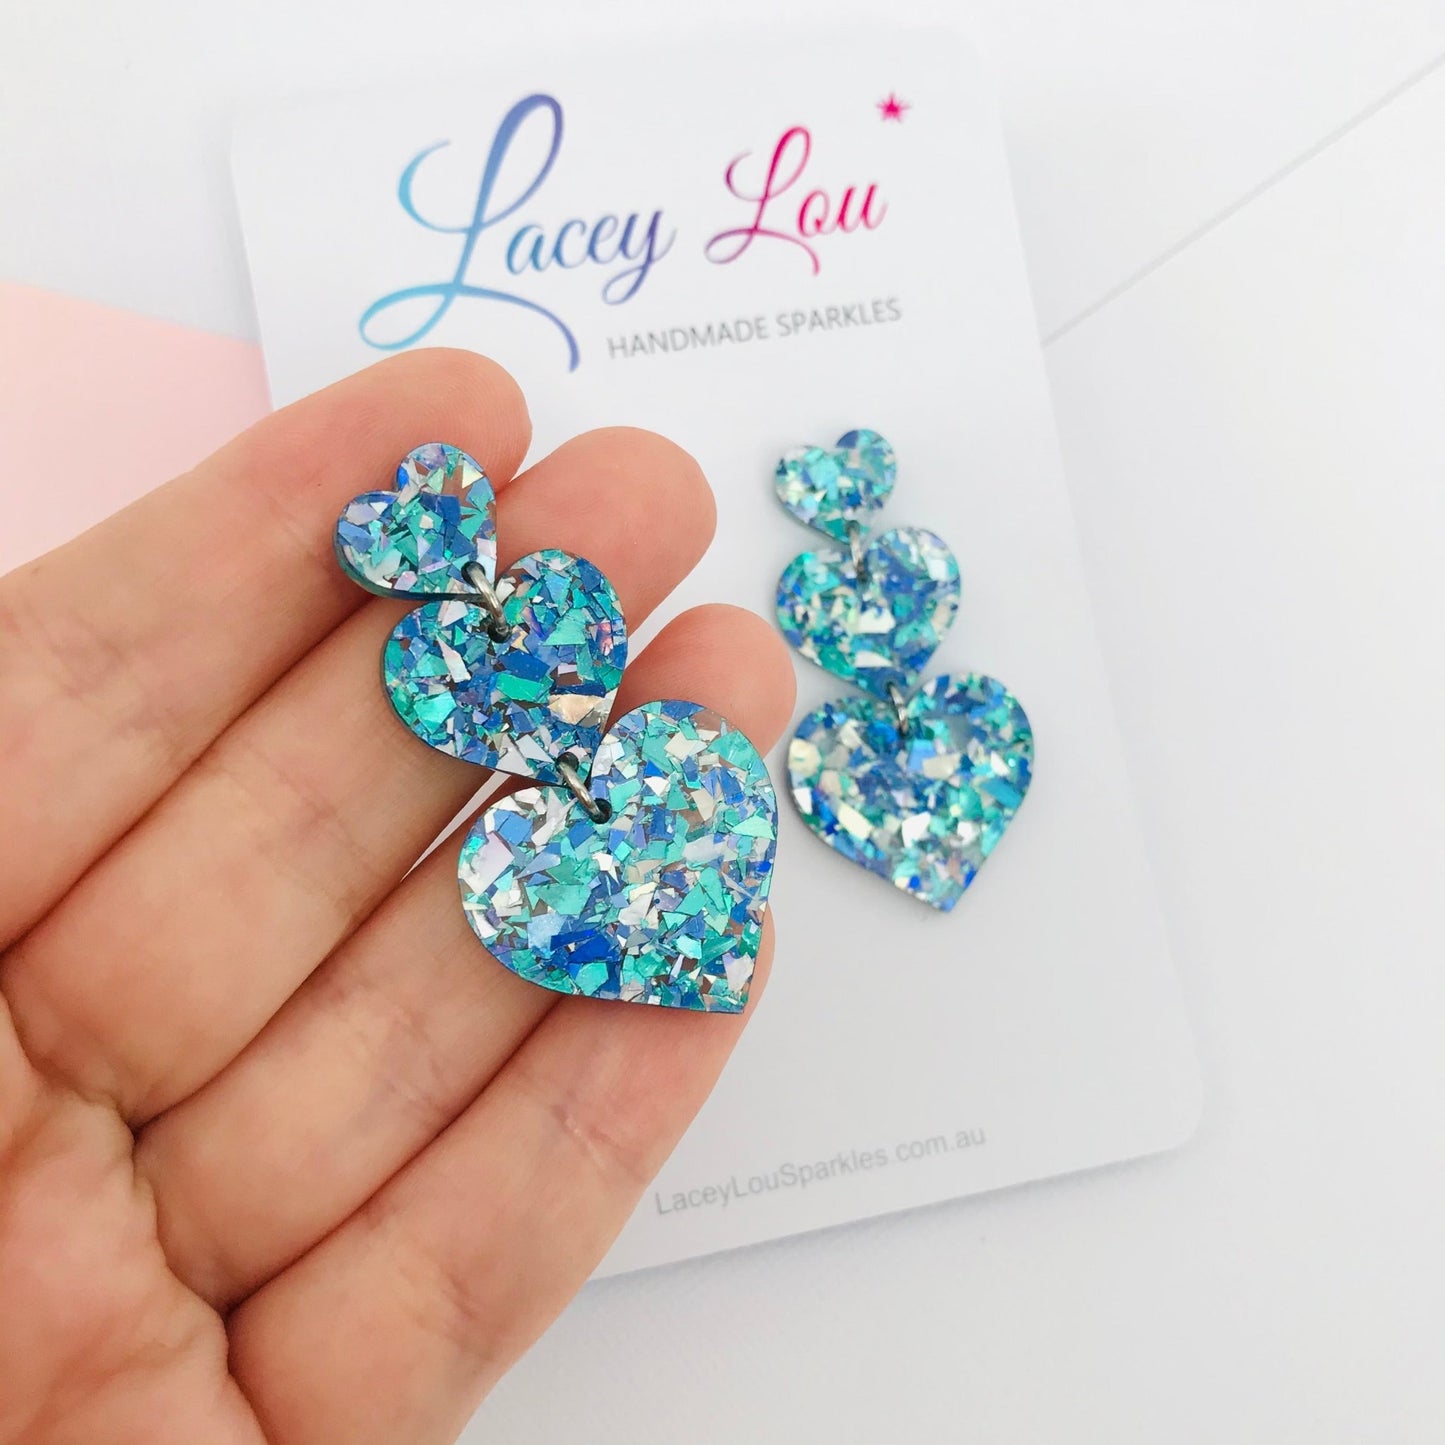 Triple Stacked Love Heart Dangles - Ice Blue Glitter - Lacey Lou Sparkles